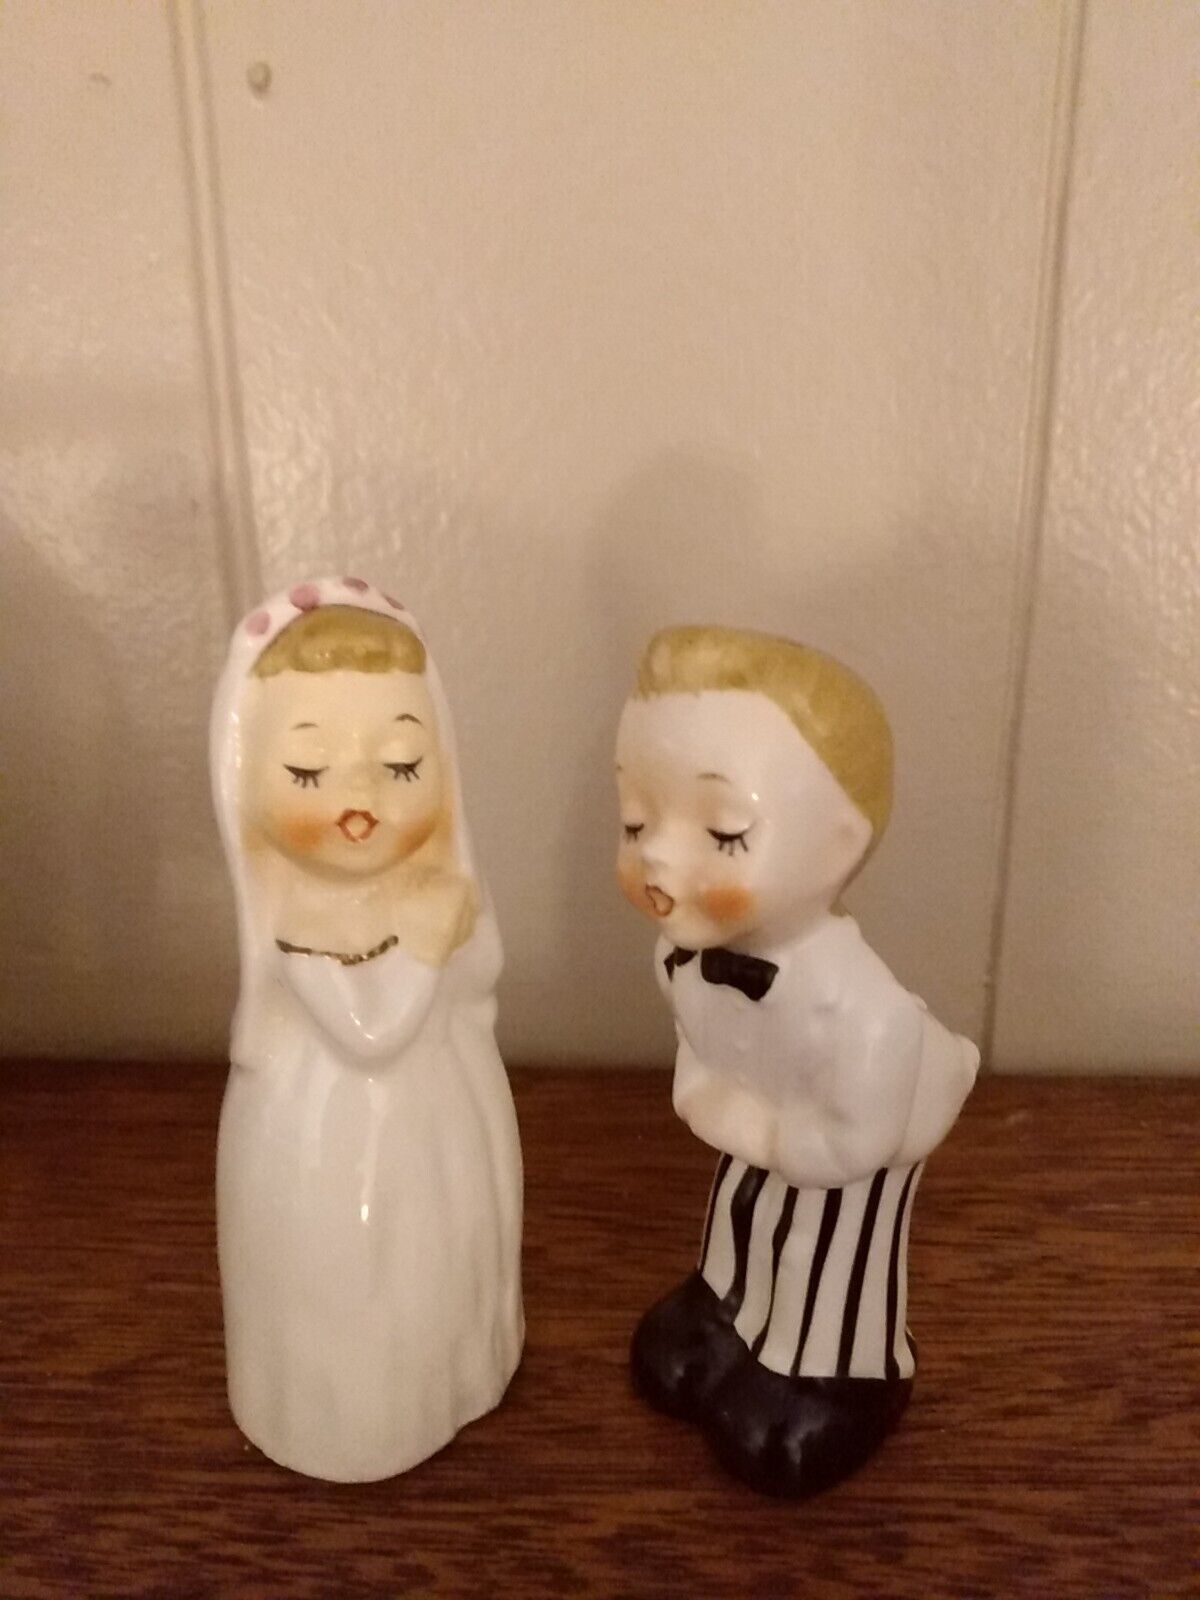 Vintage Bride And Groom Salt And Pepper Shakers With Cork Stoppers